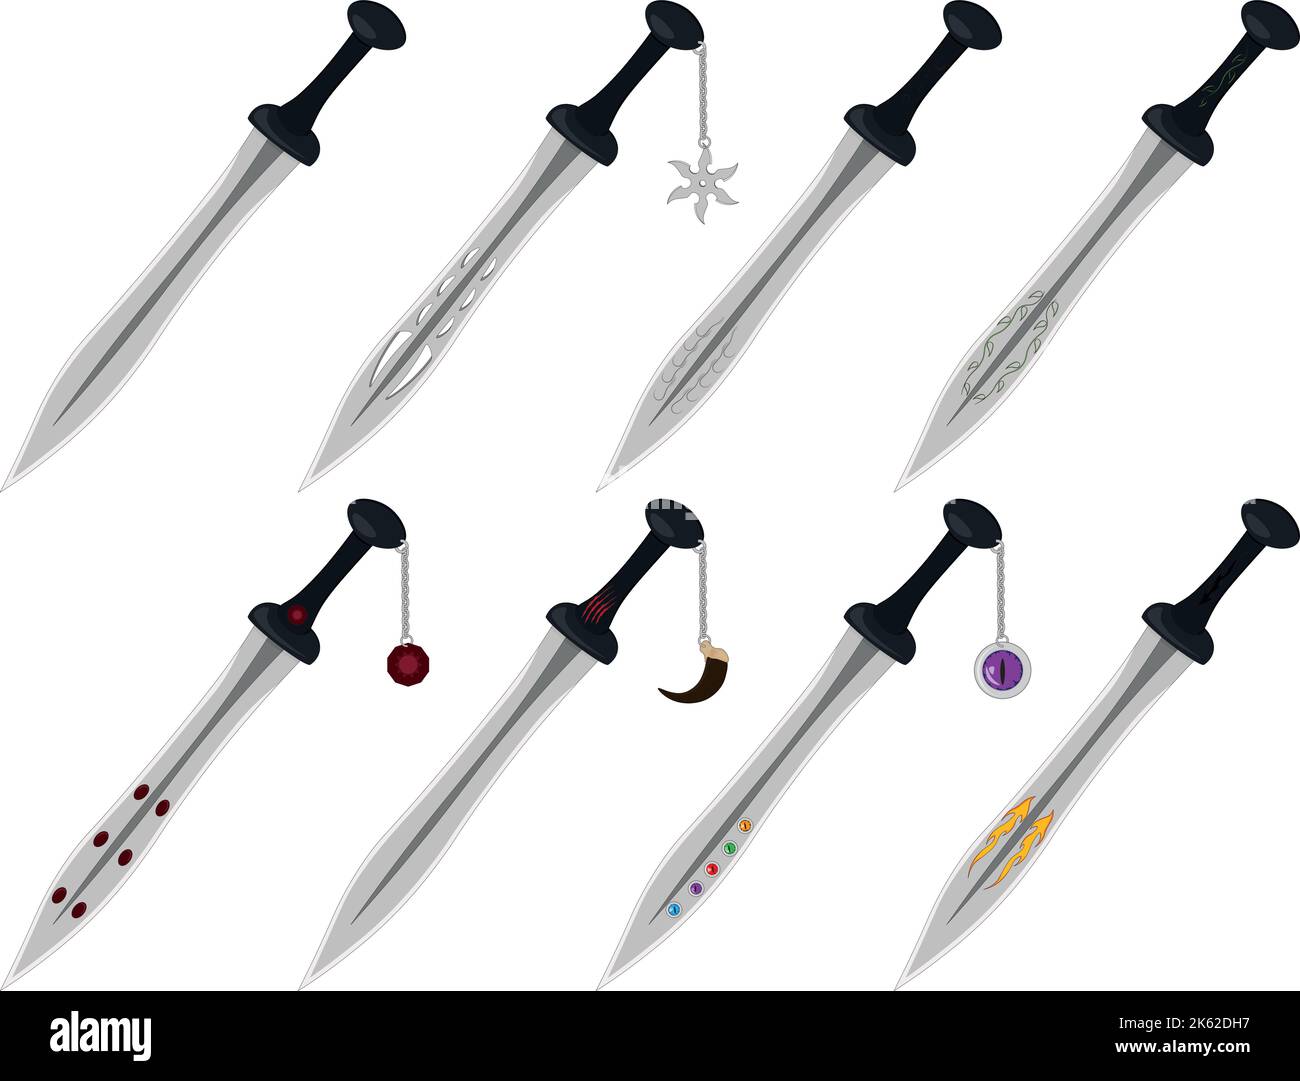 Cold cutting weapon game asset, various styles swords collection vector illustration Stock Vector